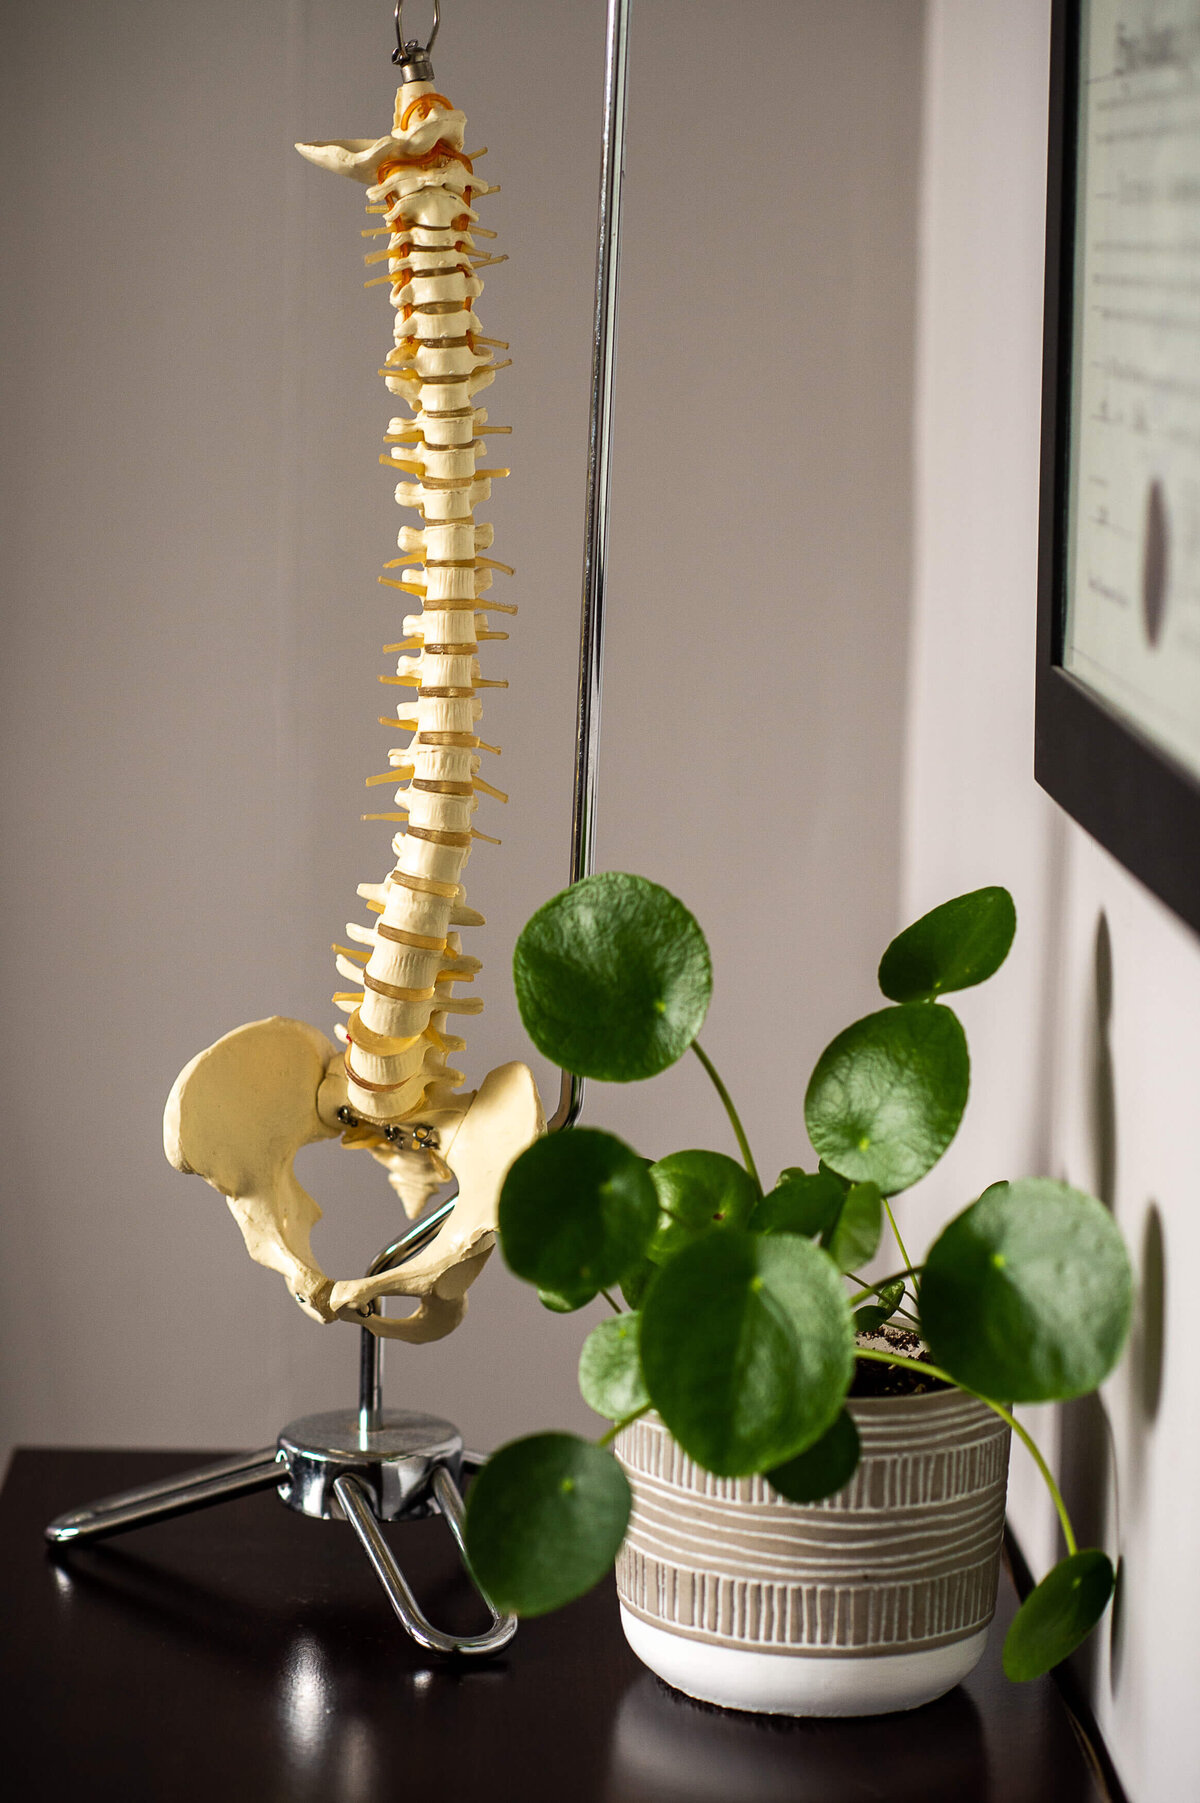 Ottawa brand photos showing a chiropractor's model of a skeleton.  Captured on location by JEMMAN Photography Commercial